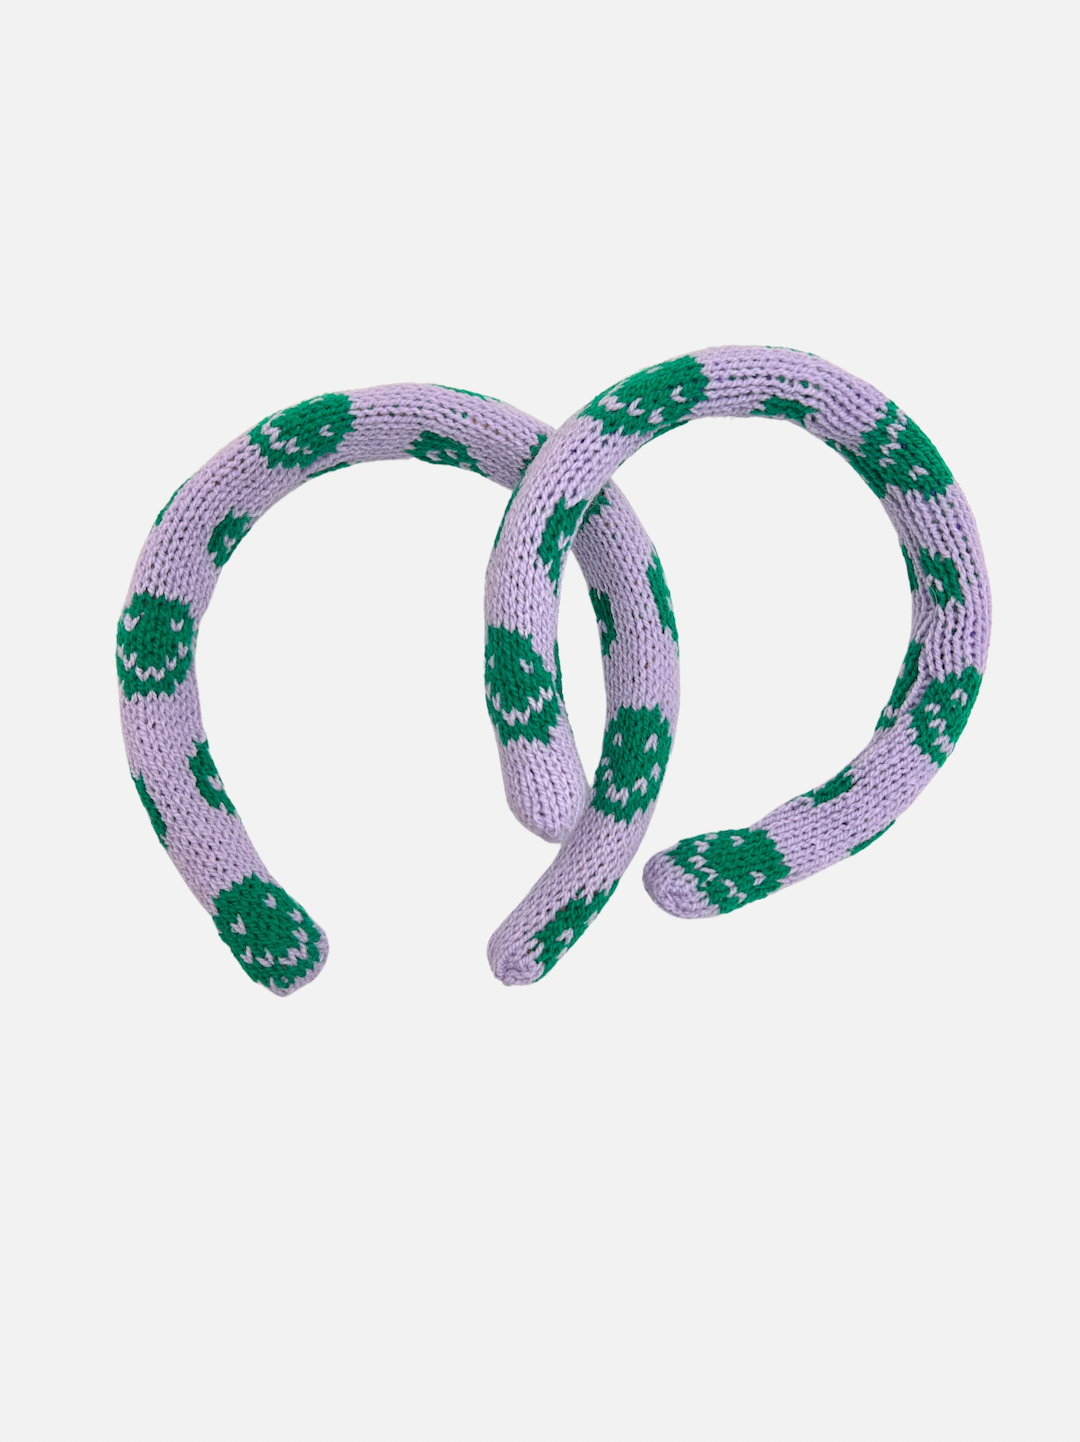 Purple/Green Smiley | Two sizes of kids' knitted headband with green smileys on a purple background